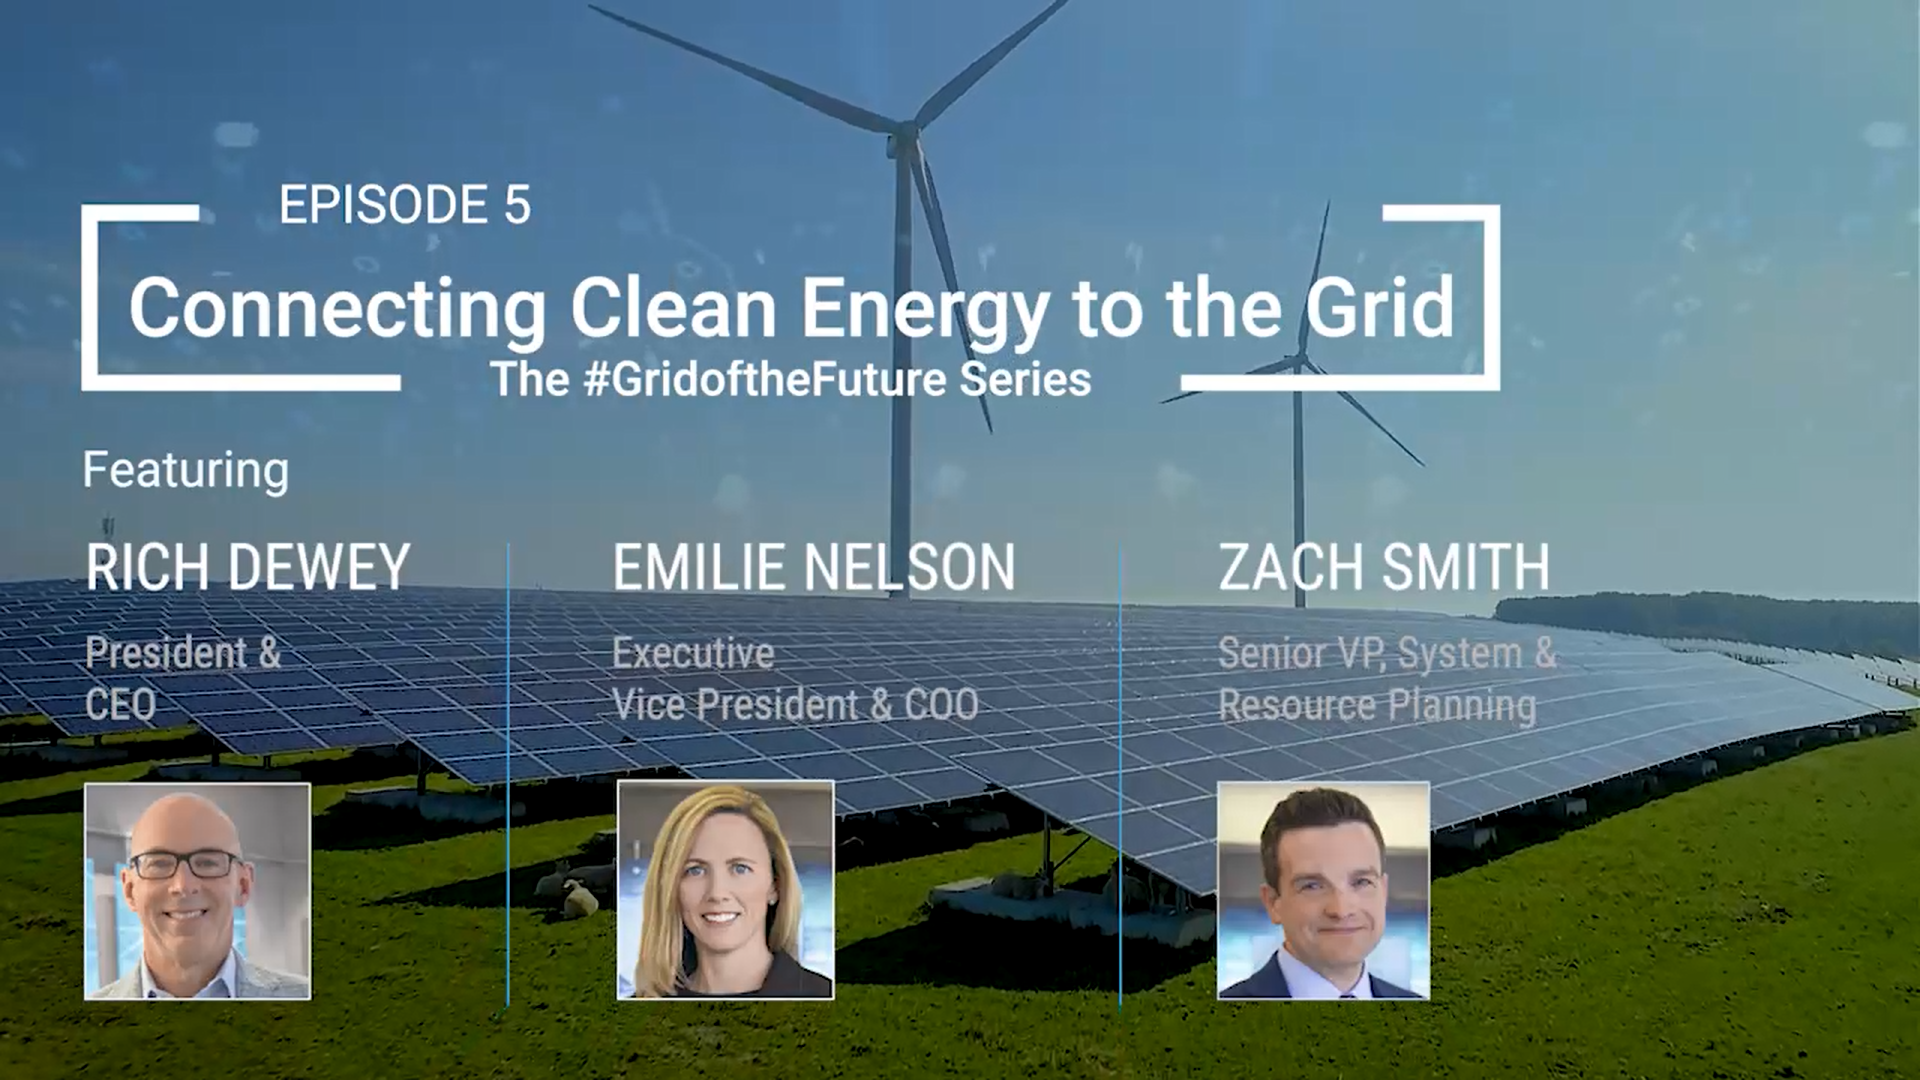 BLOG: Episode 5: Connecting Clean Energy to the Grid